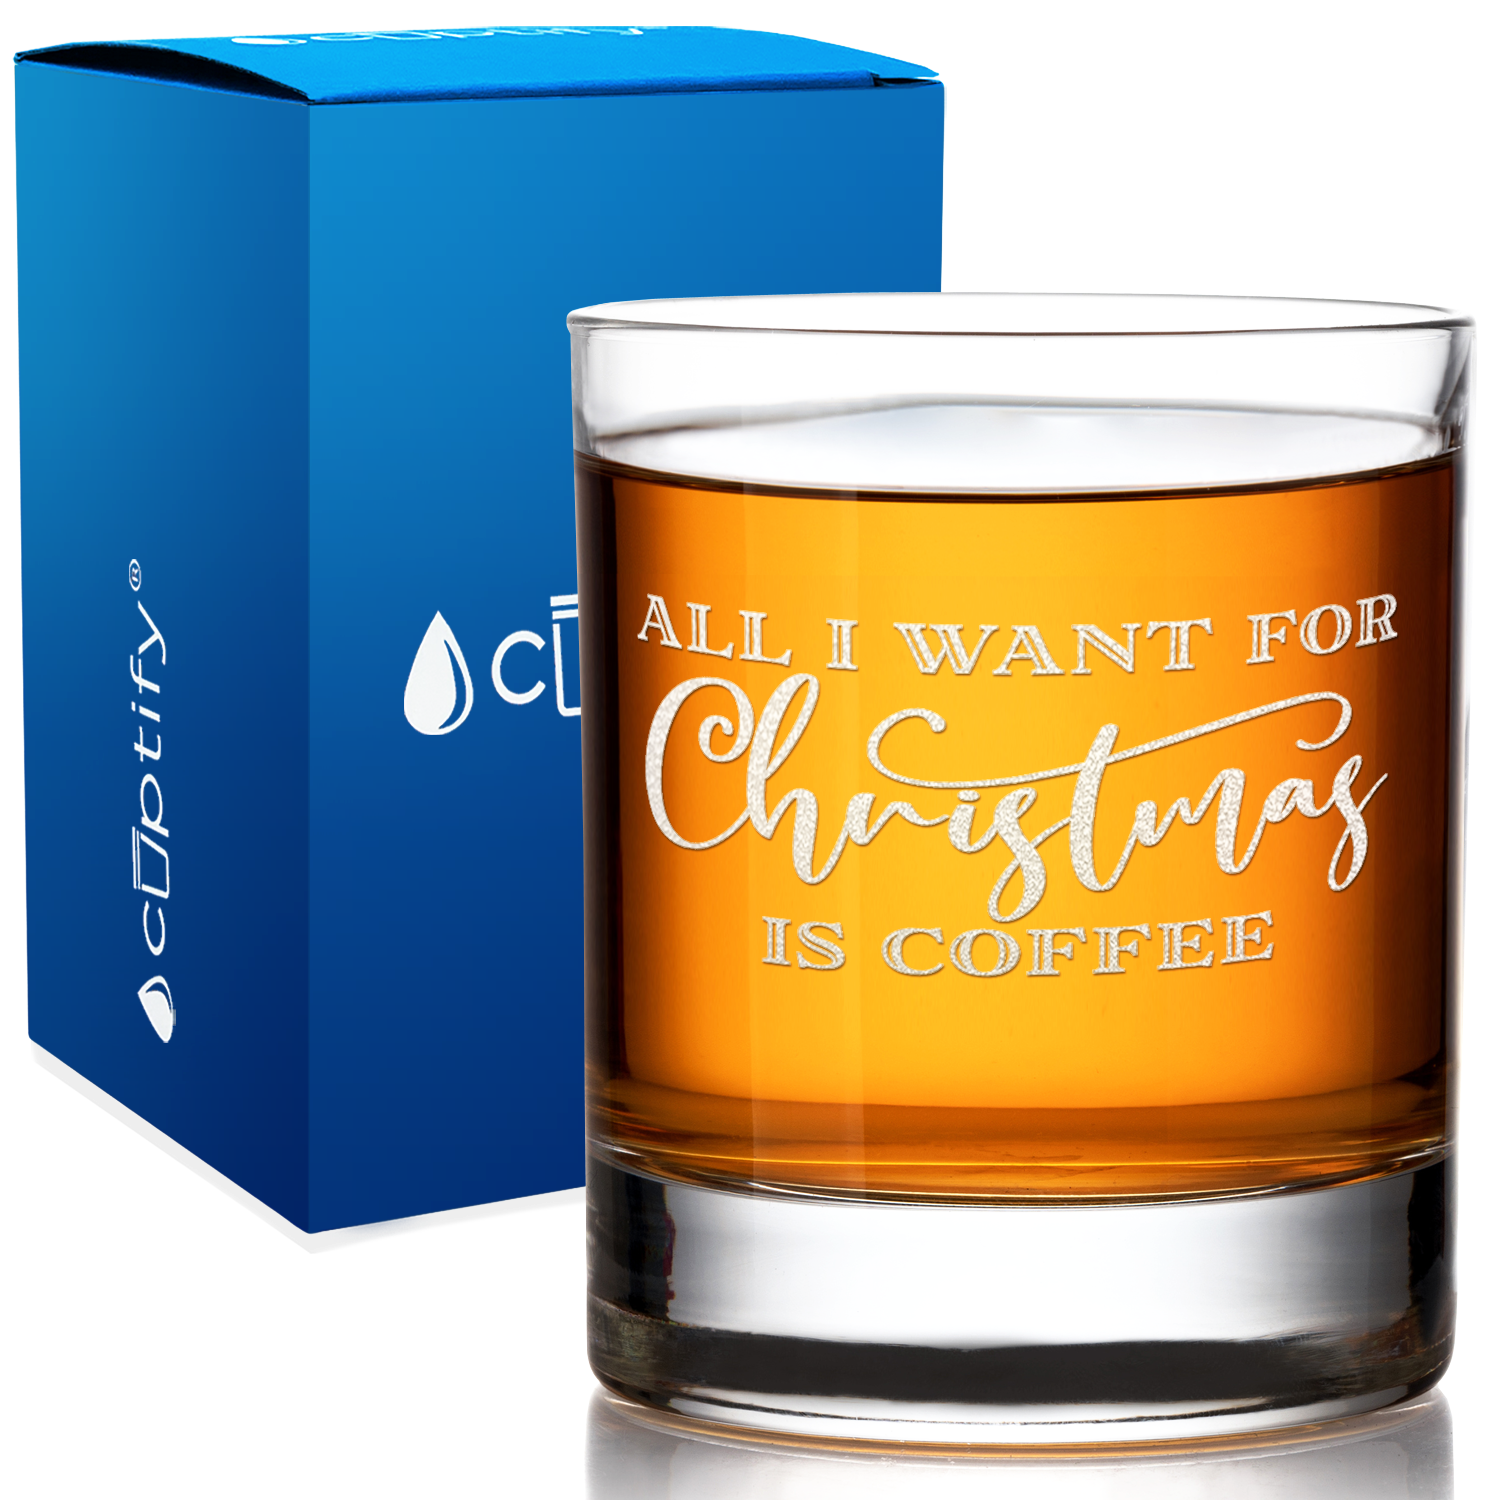 All I want for Christmas is Coffee on 10.25 oz Old Fashioned Glass